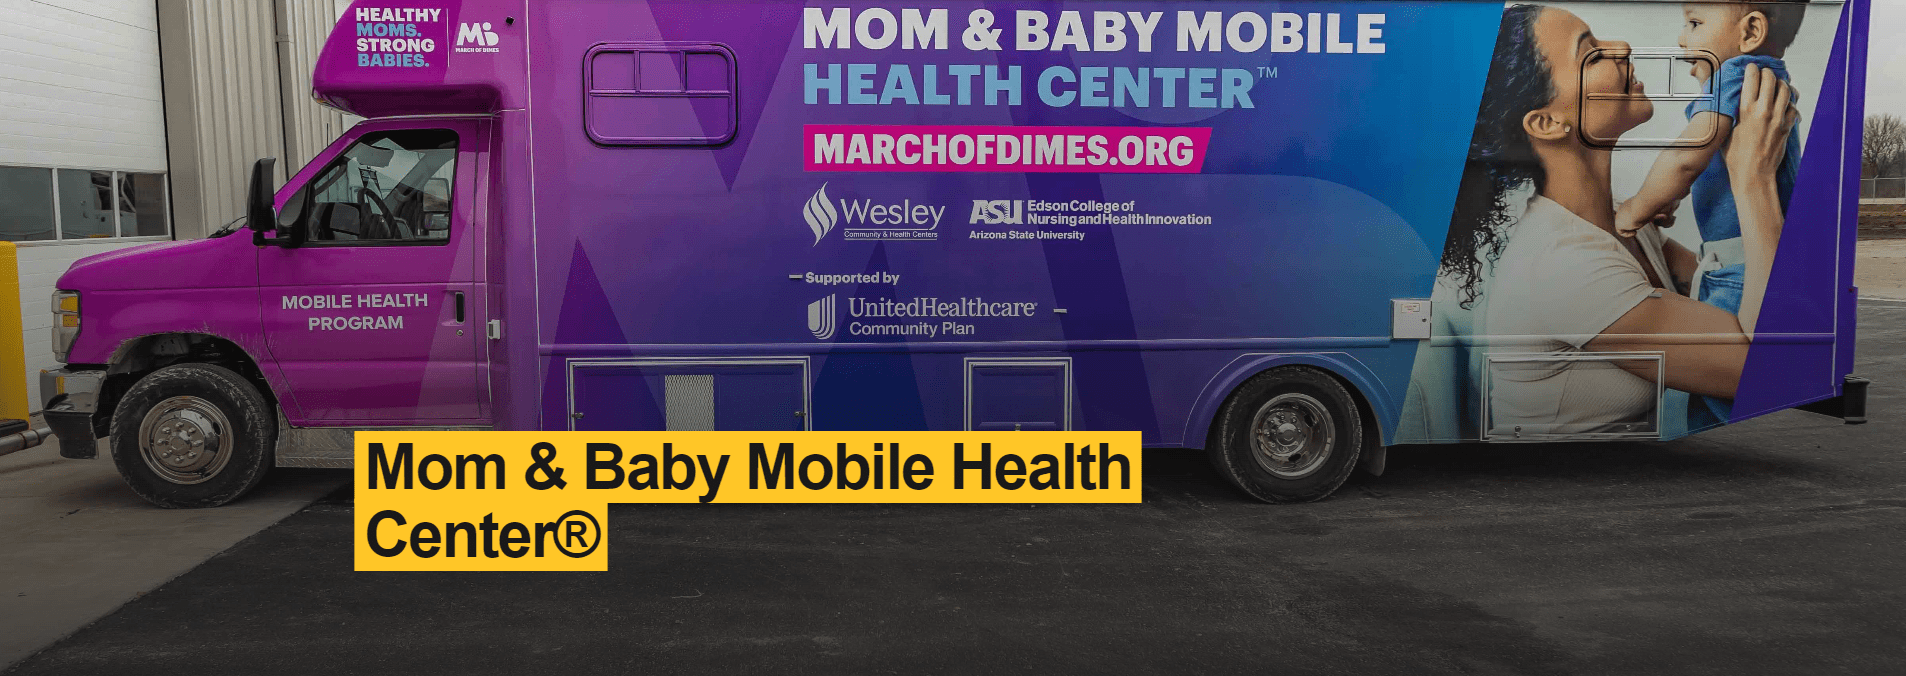 Maternal Health: Philips & March of Dimes Offers Ultrasound Screenings at Mobile Clinics in Phoenix, Tuscon & DC